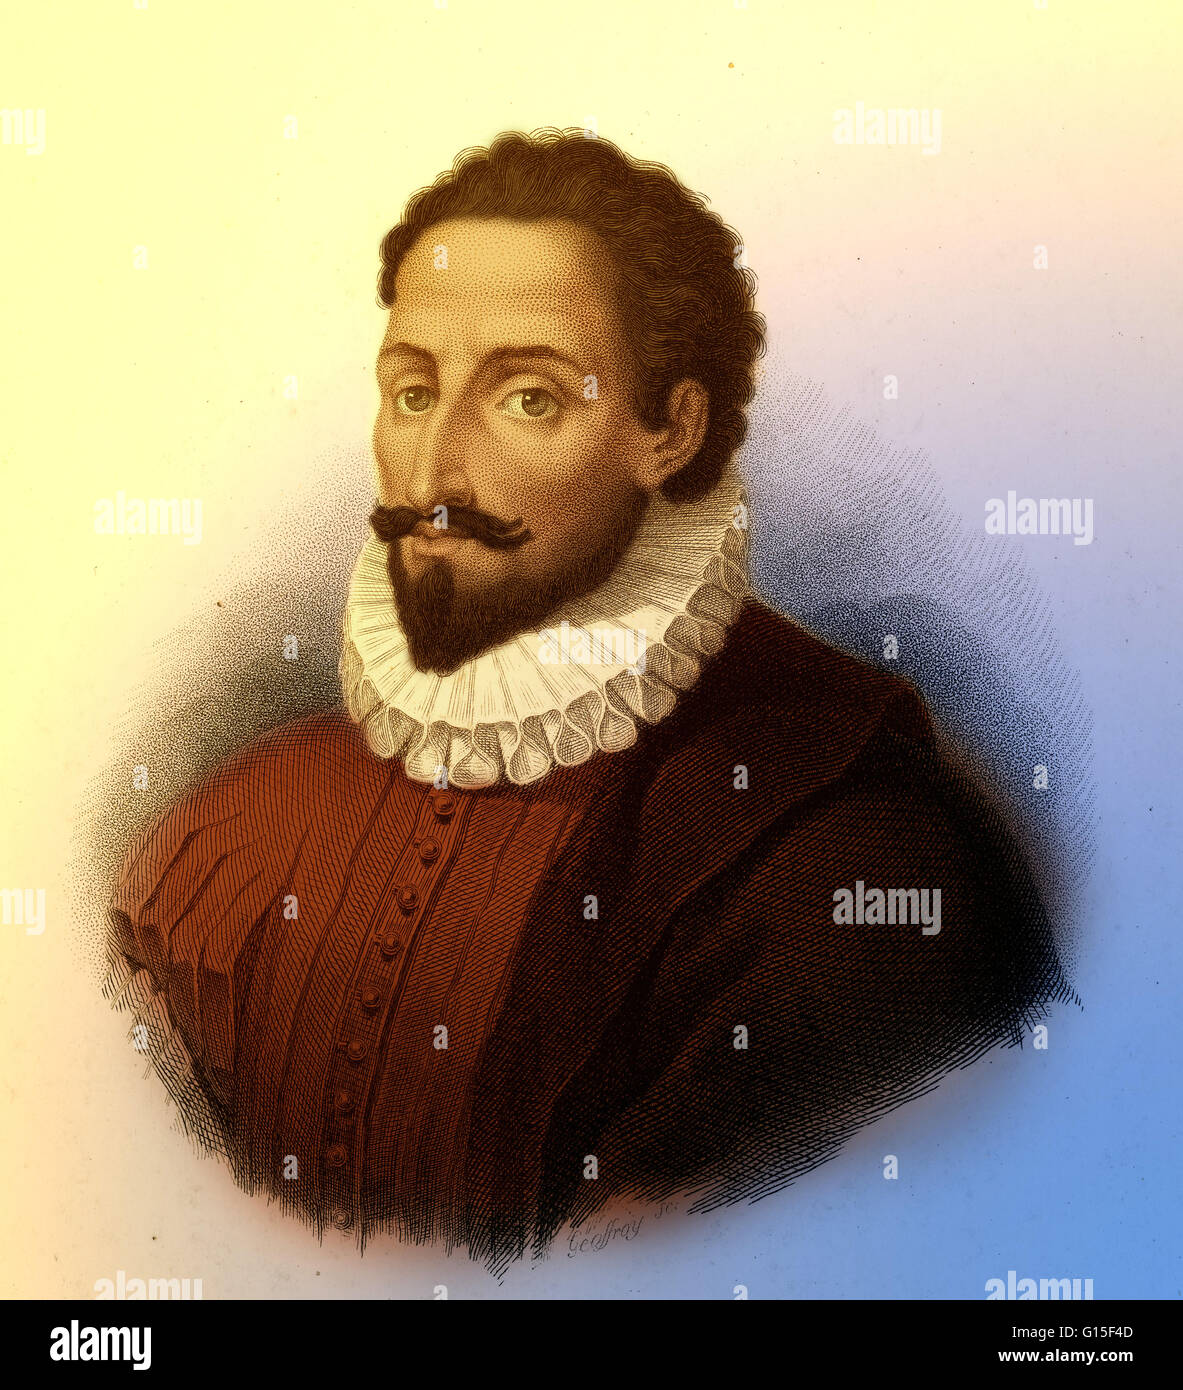 Miguel de Cervantes Saavedra (1547-1616) was a Spanish novelist, poet, and playwright. His masterpiece, Don Quixote, is considered the first modern European novel, a classic of Western literature, and regarded as one of the best works of fiction ever writ Stock Photo